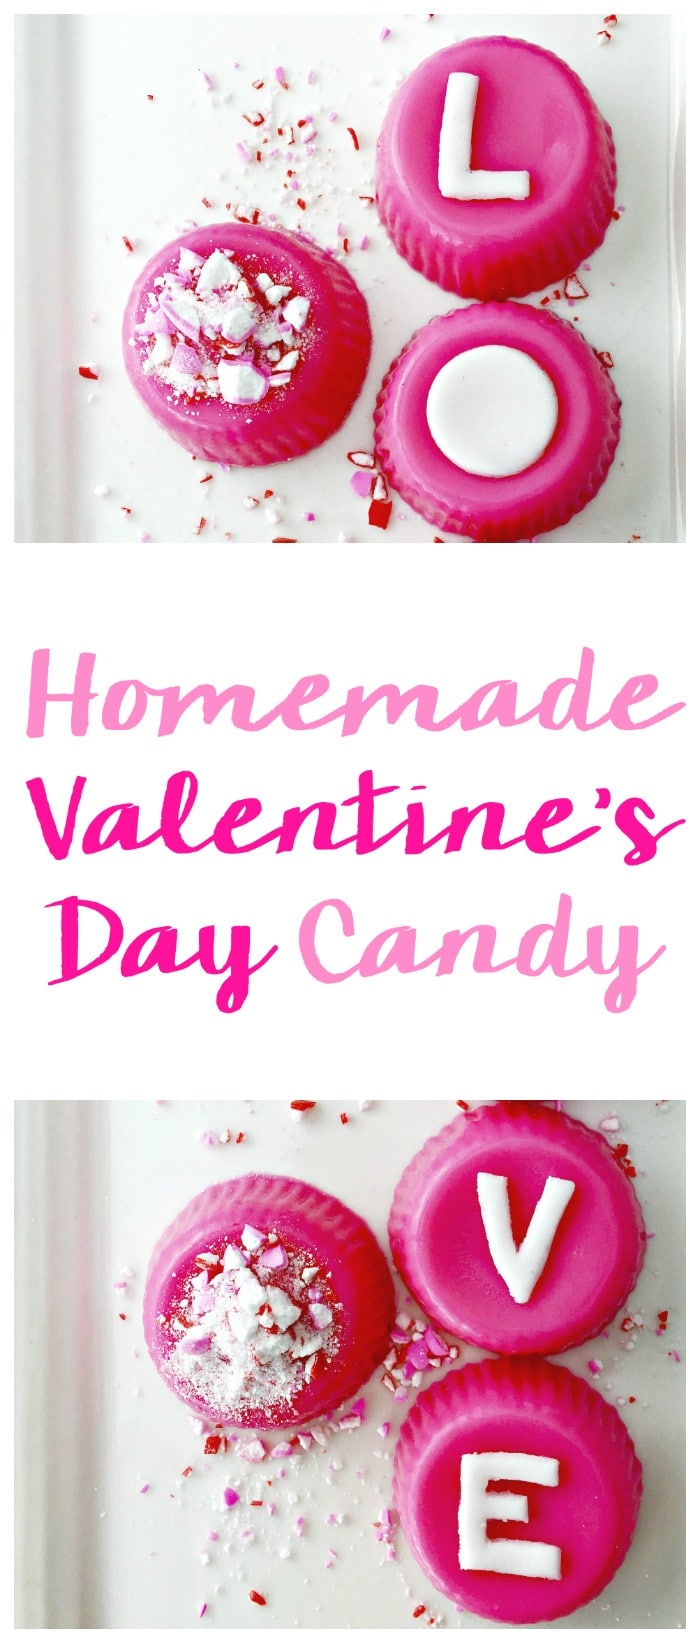 Homemade Valentine’s Day candy